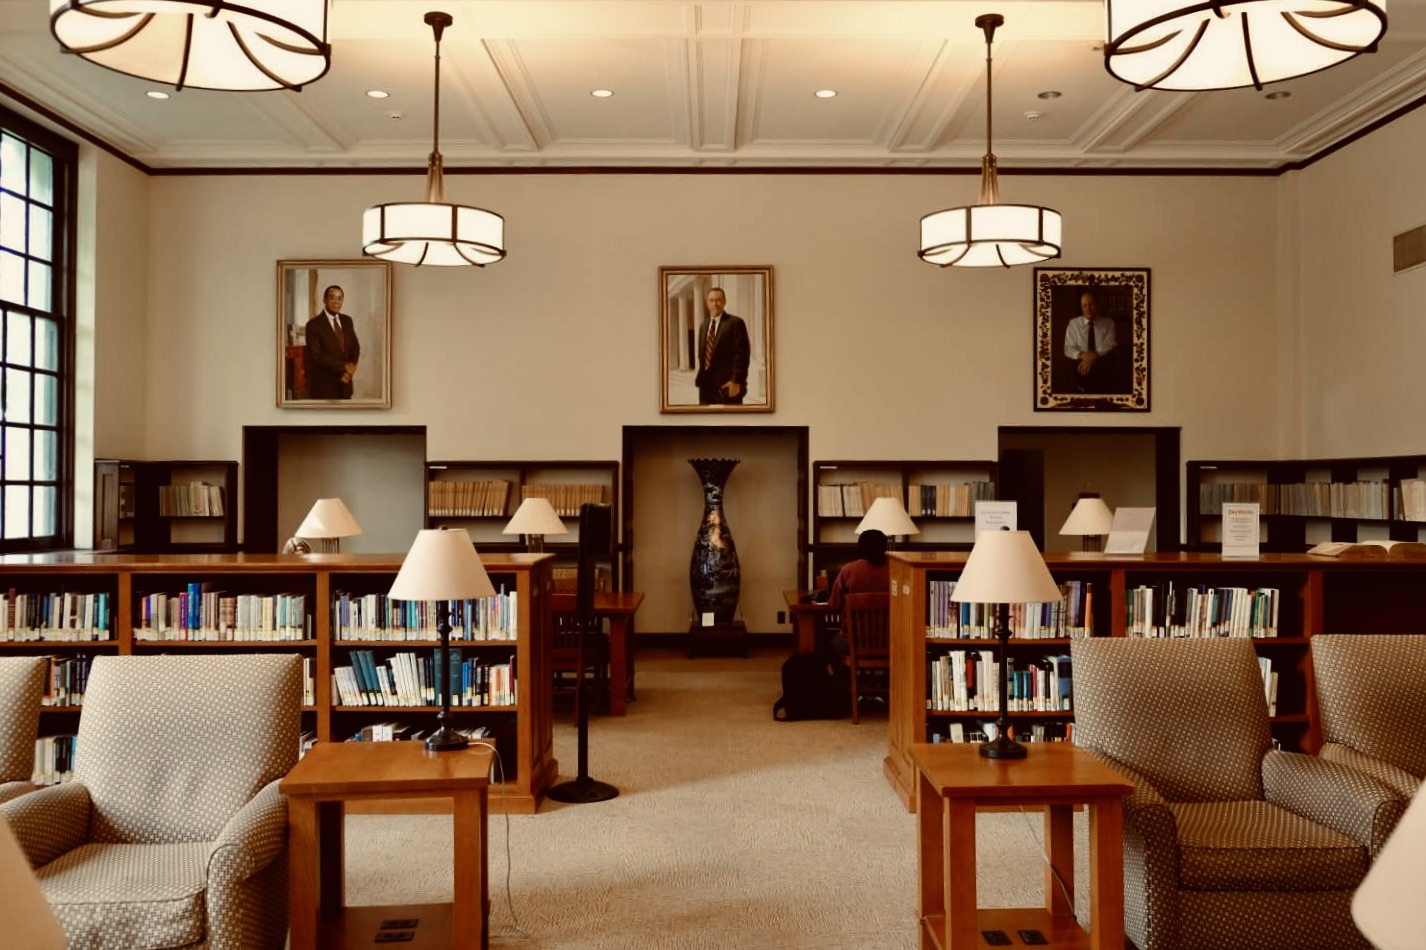 Portraits by Ross Rossin in the Ahmanson Reading Room in the Mary Norton Clapp Library